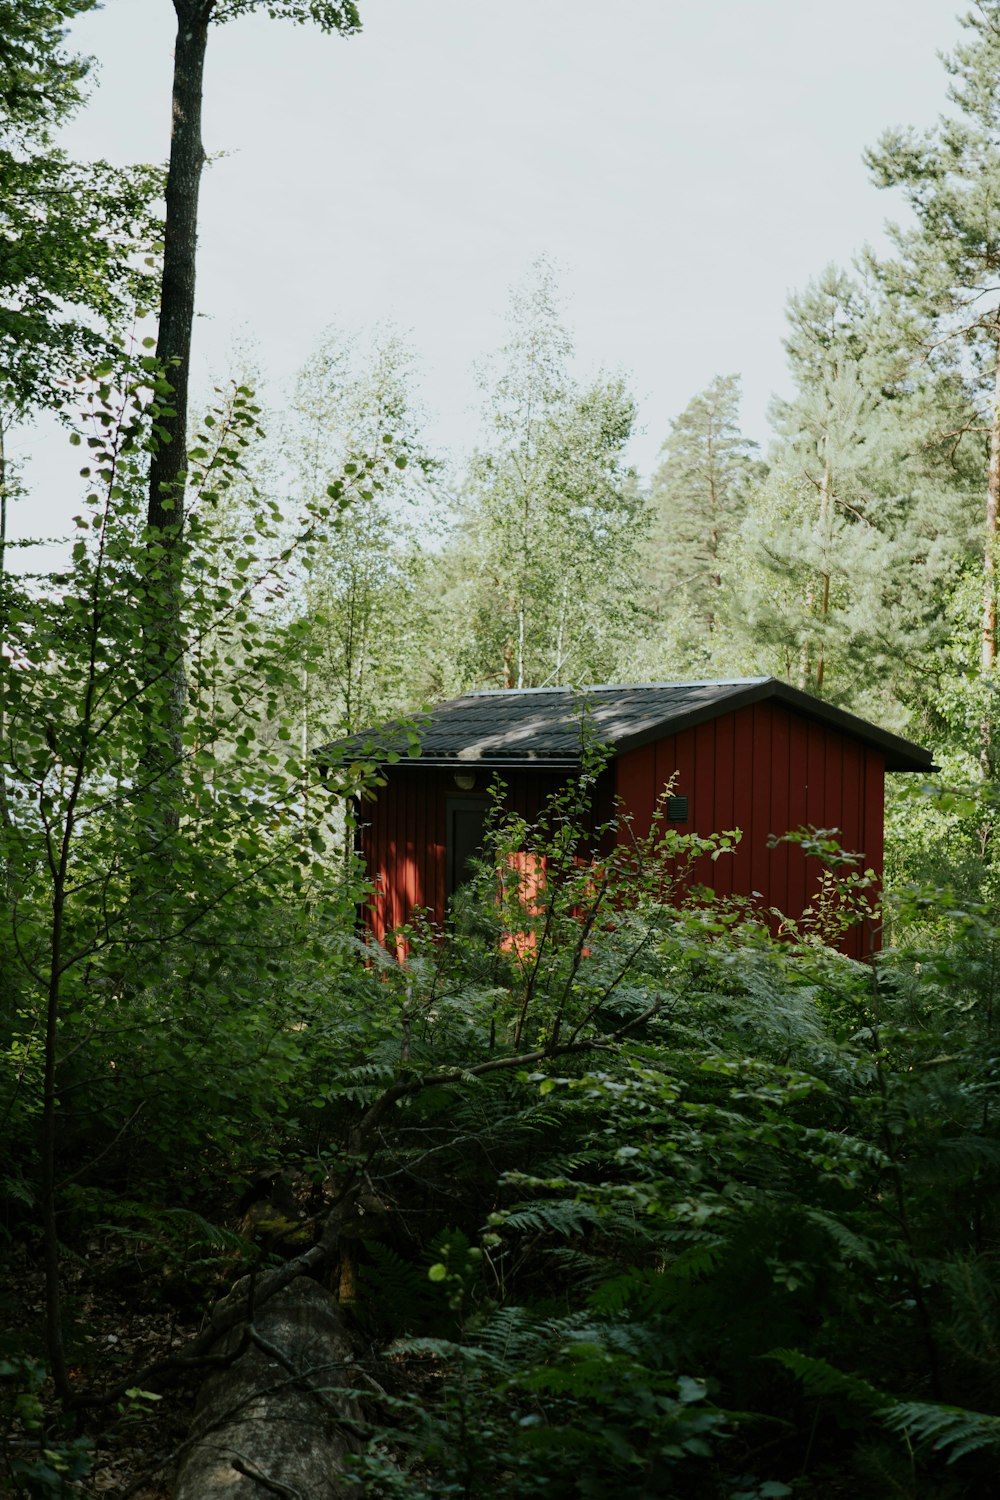 a small red building in the middle of a forest